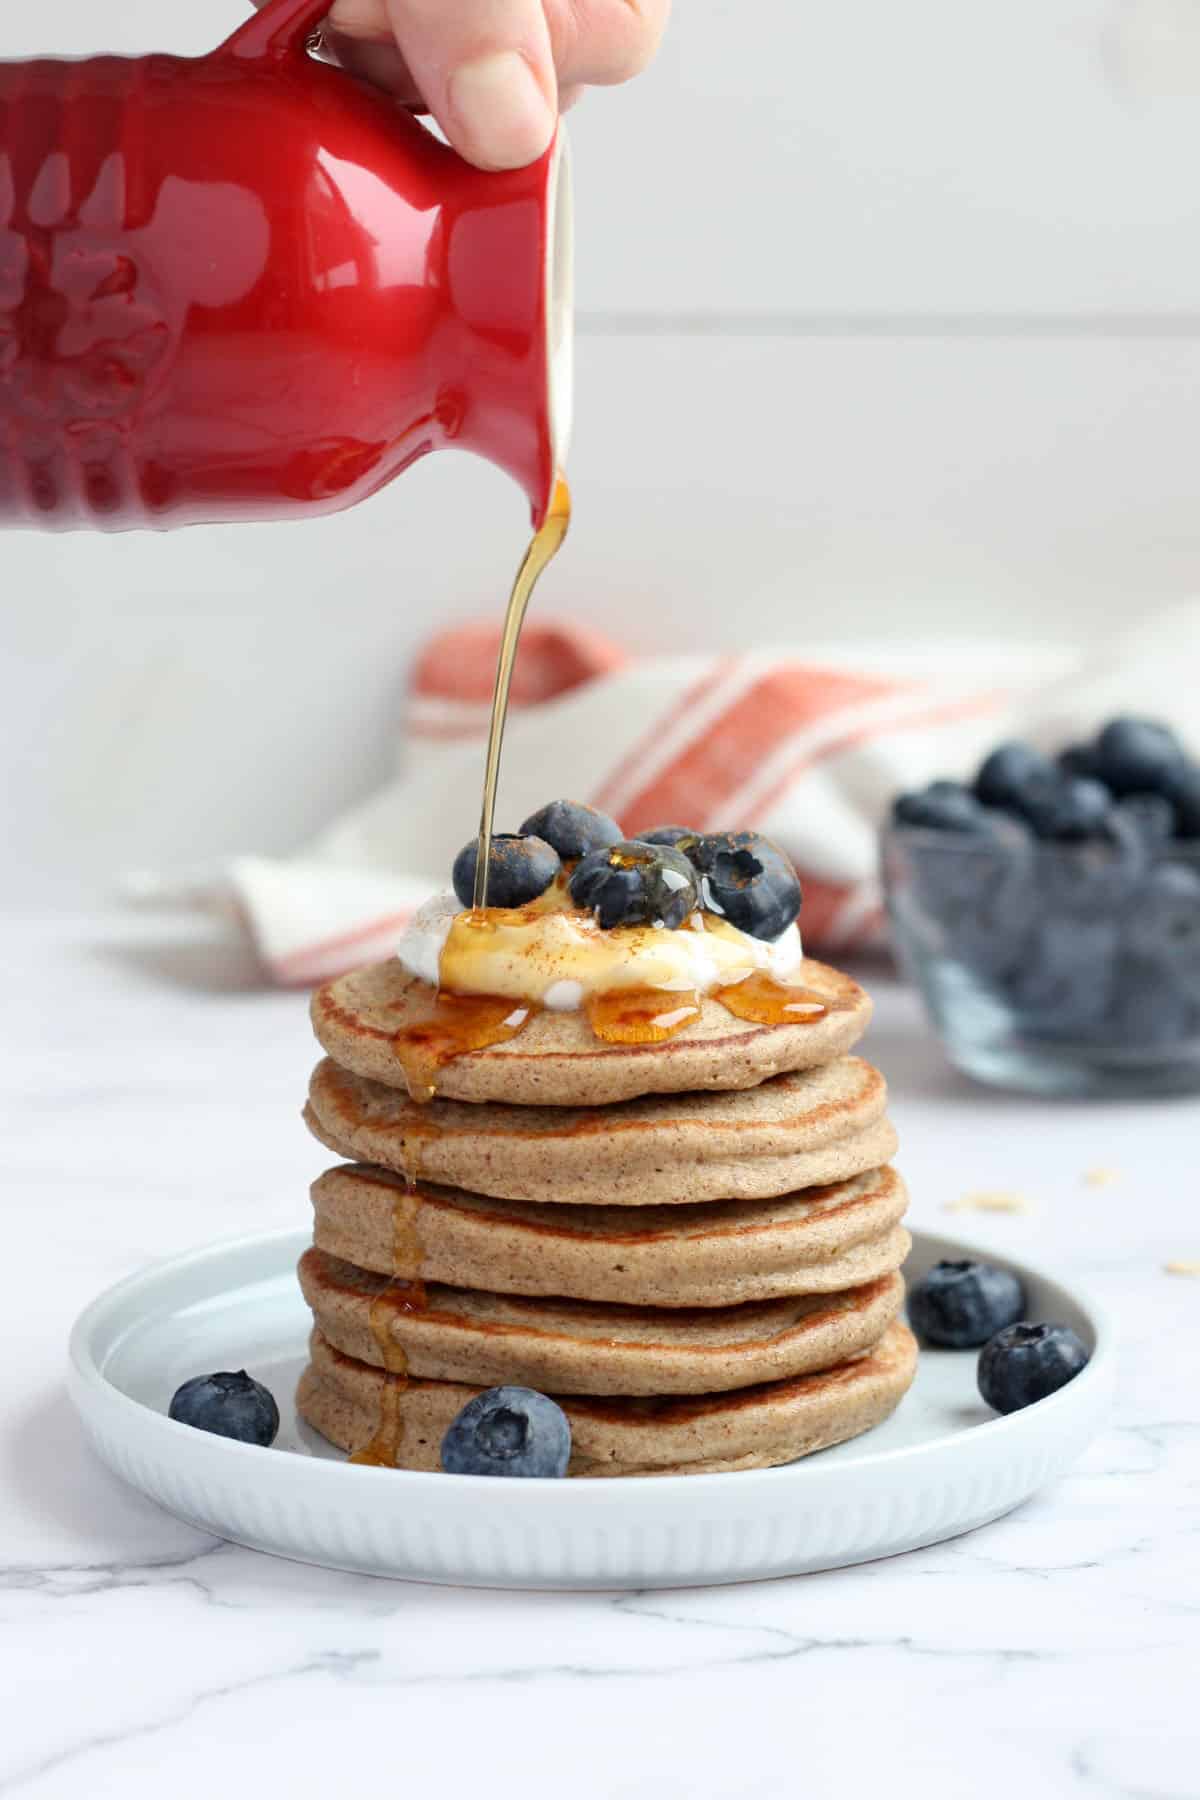 A pile of pancakes topped with blueberries drizzled with maple syrup